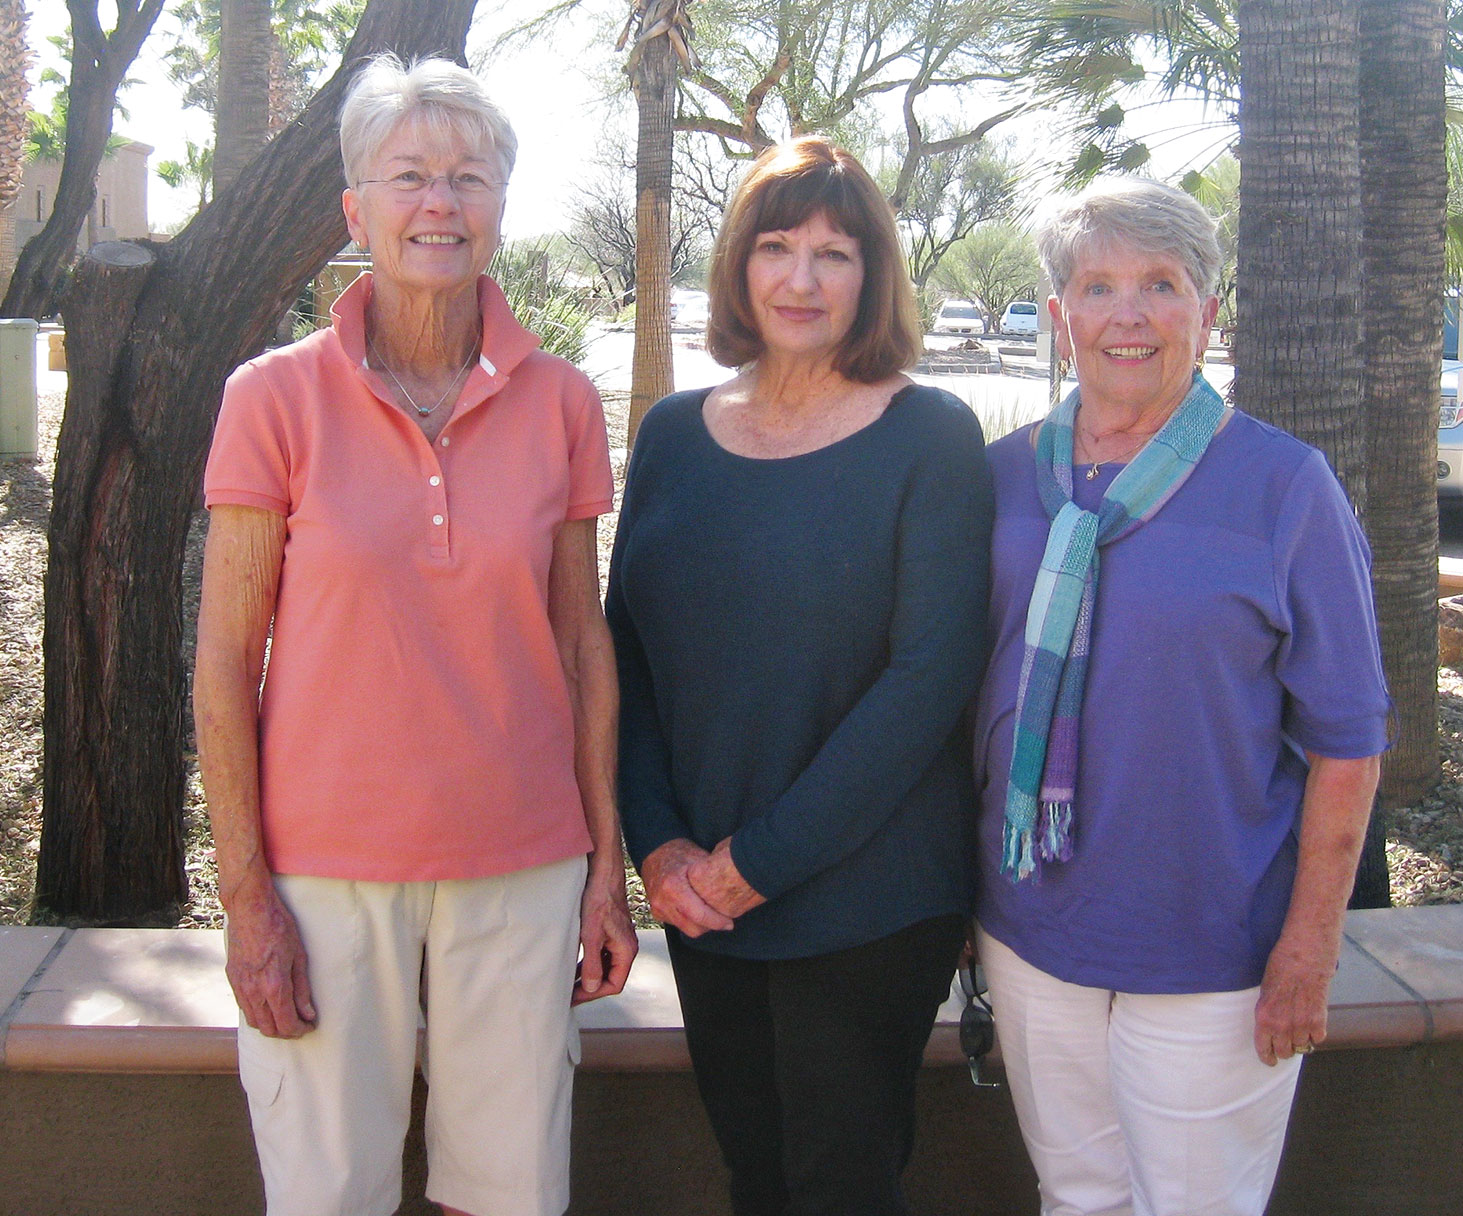 Member guest co-chairs: Cathy Nelms, Barbara Erickson and Susan Kuehn